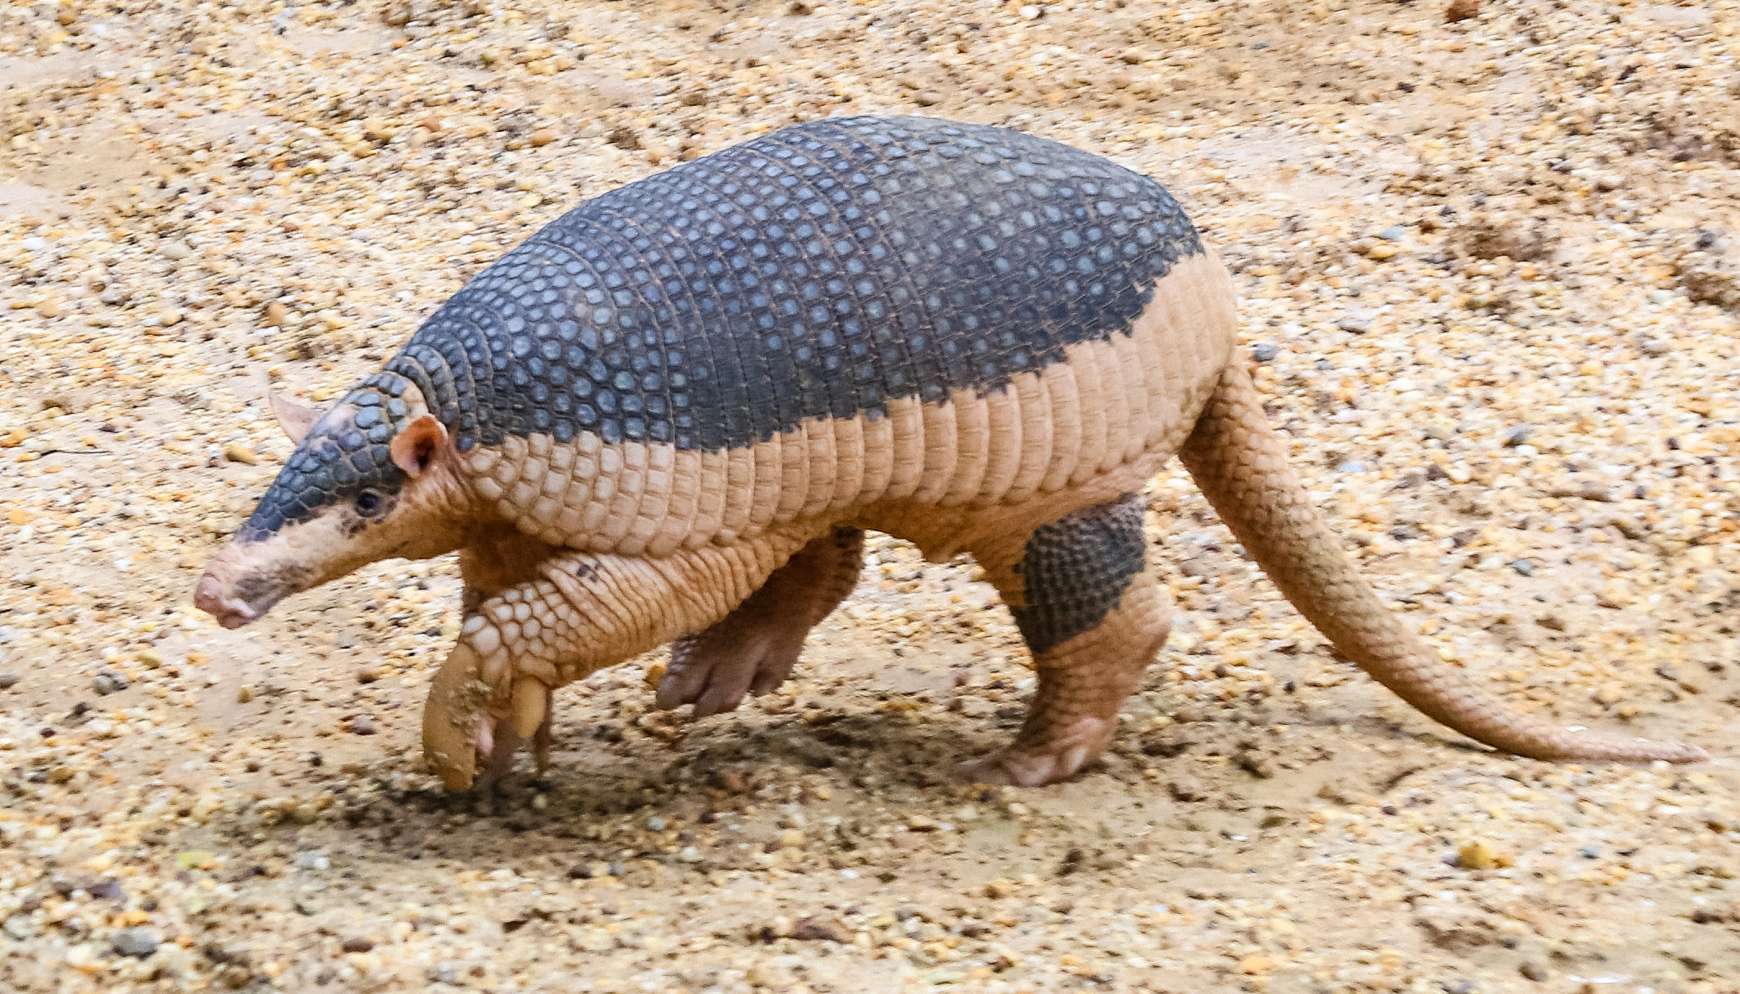 Early American humans used to hunt giant armadillos and live inside their shells 6